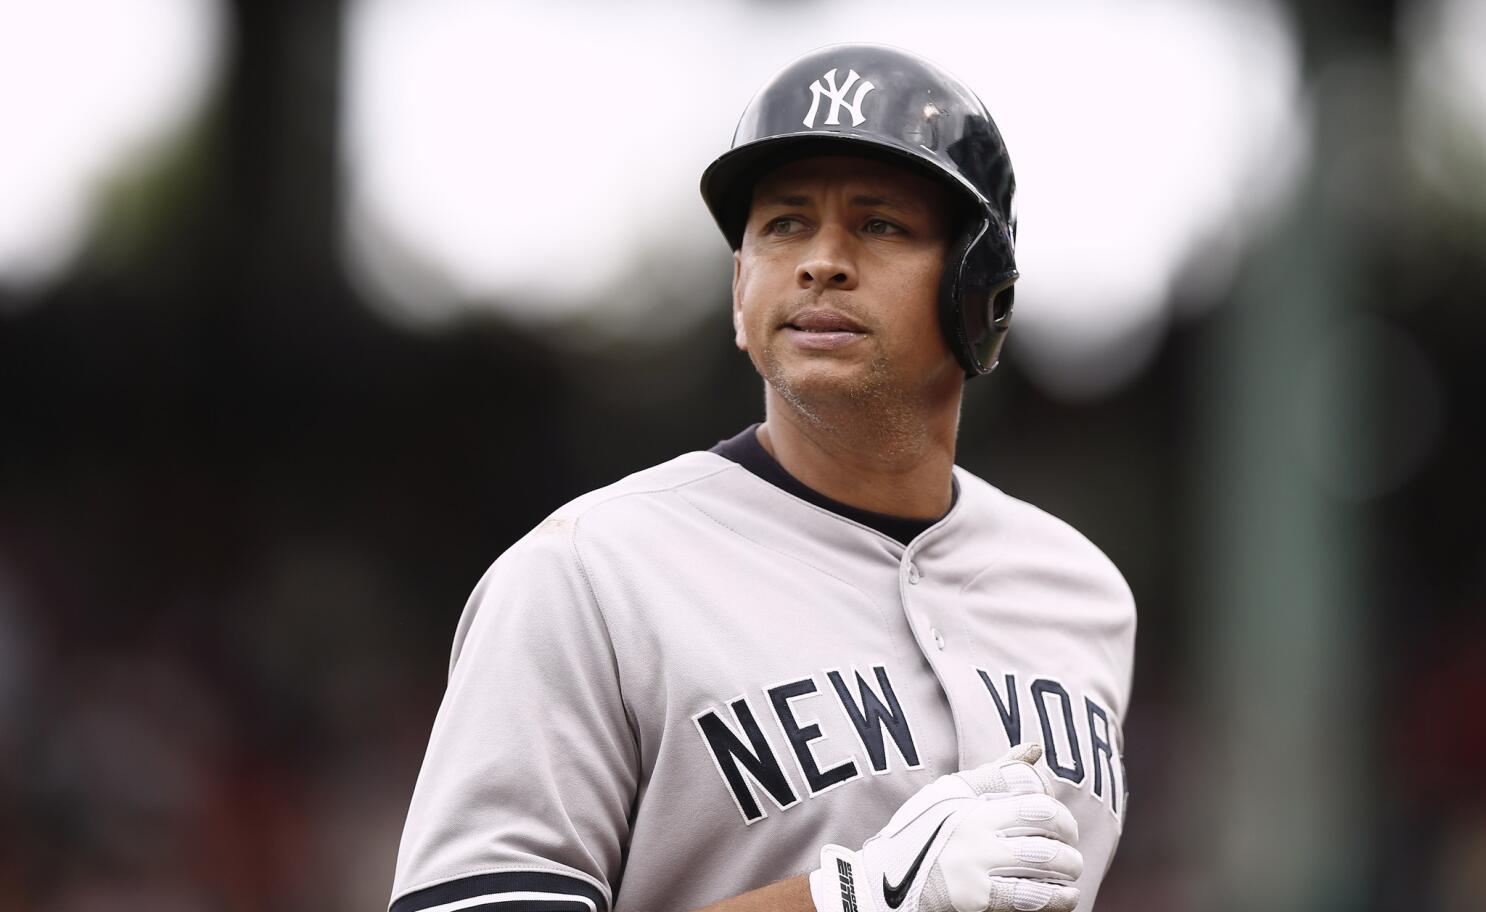 Alex Rodriguez confessed to feds that he used steroids, reports